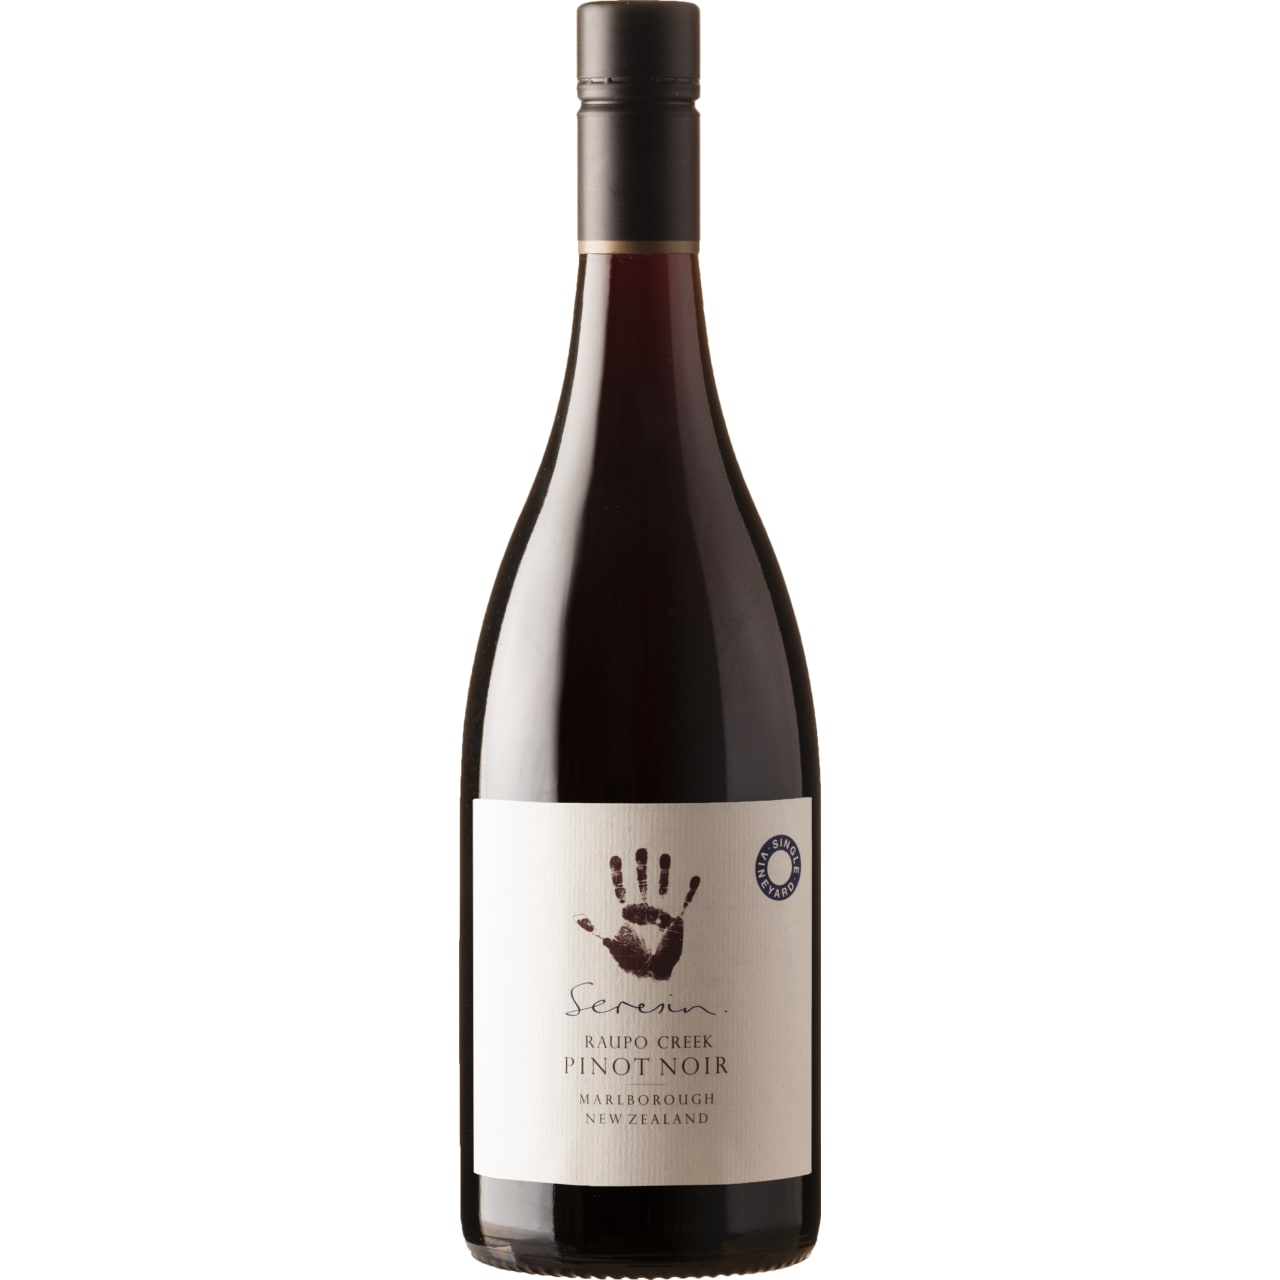 The exquisite Pinot Noir is concentrated, with deep earth, spice and hedgerow fruit characters, framed by fine, well-integrated tannins and a persistent, fresh finish.